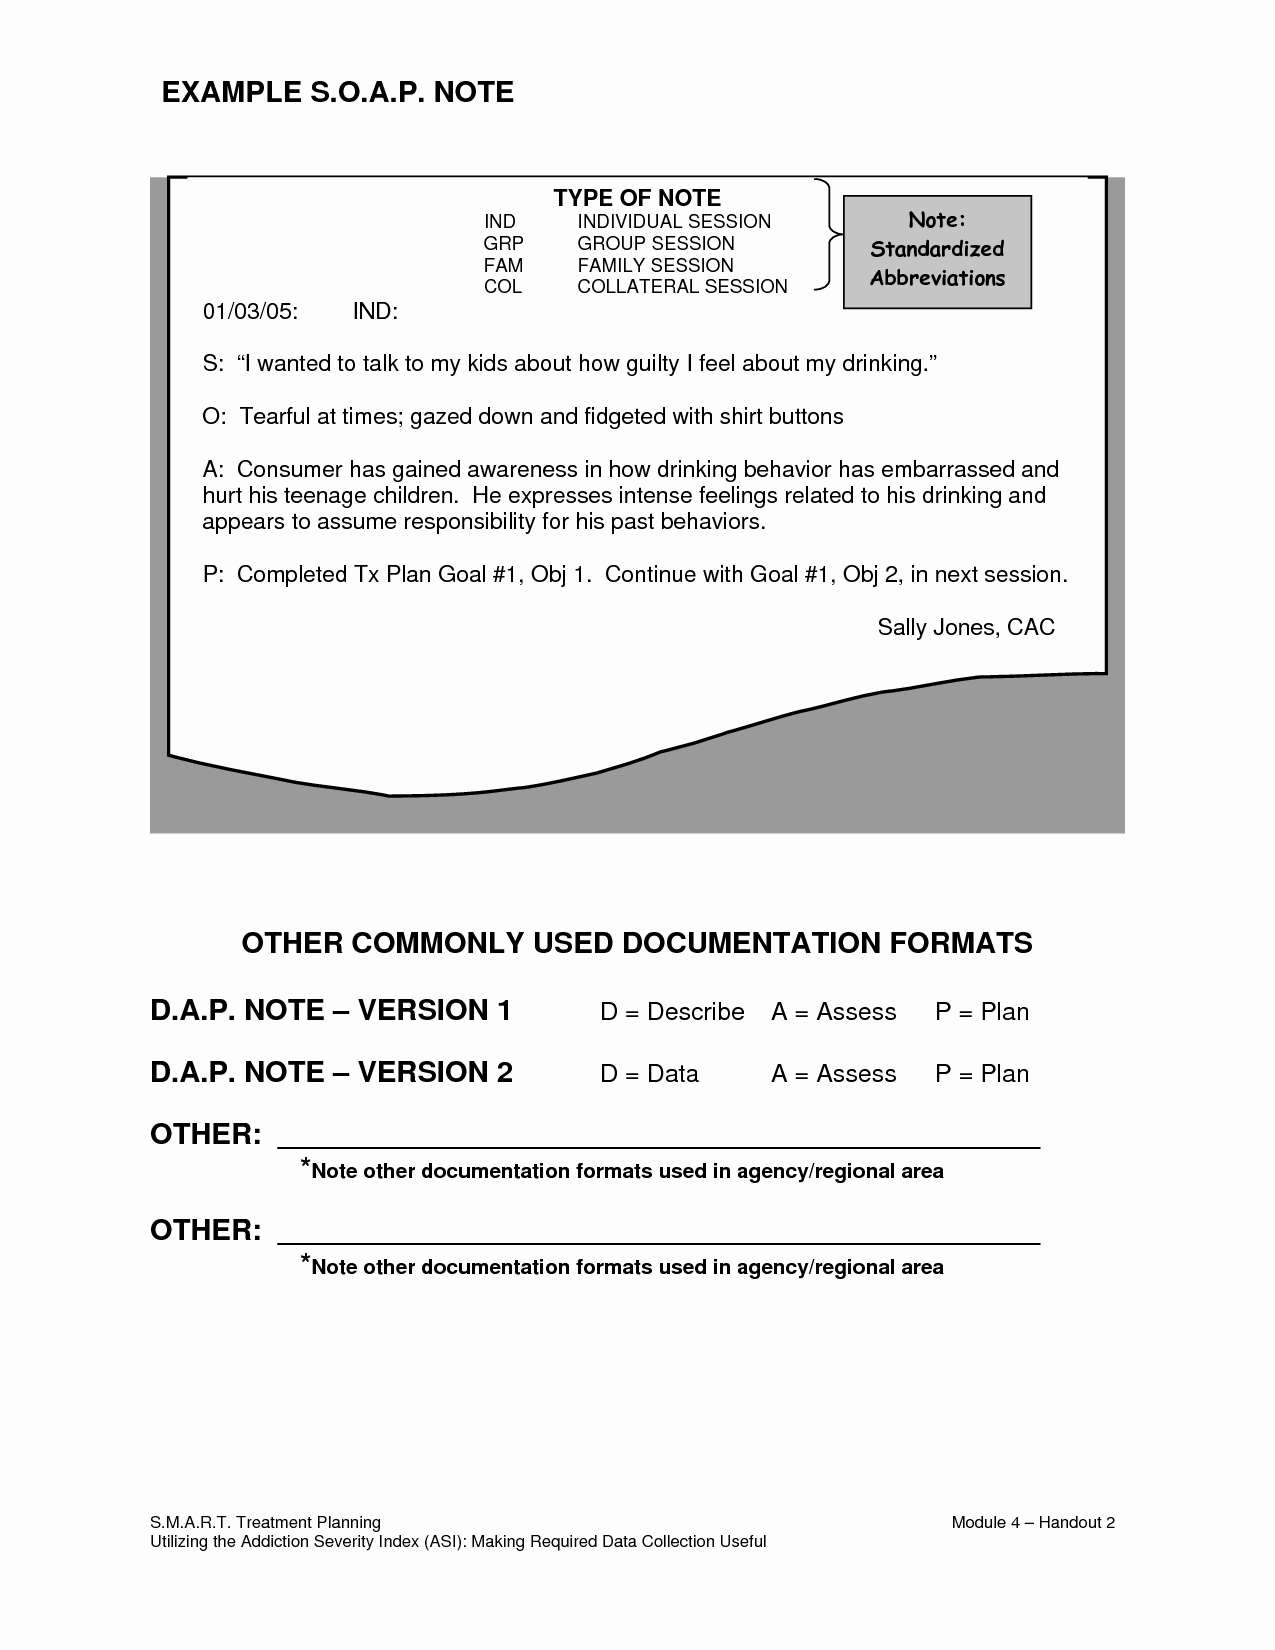 Psychiatric soap Note Template Elegant Counseling soap Note Example … List for Notes